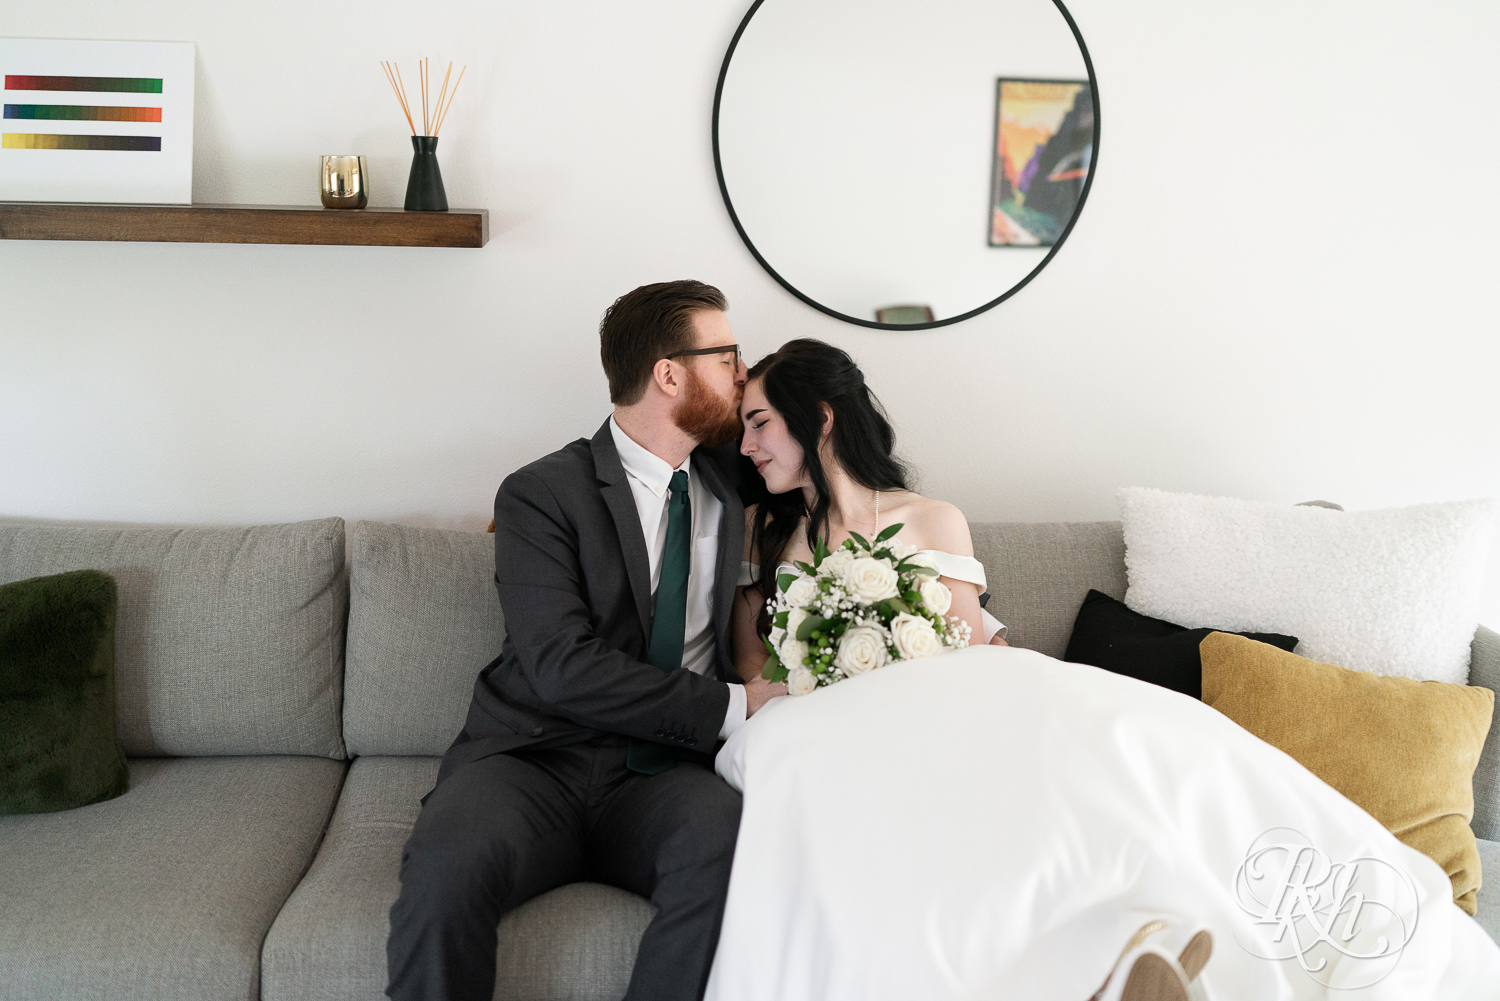 Bride and groom kiss on couch at their house wedding in Sartell, Minnesota.